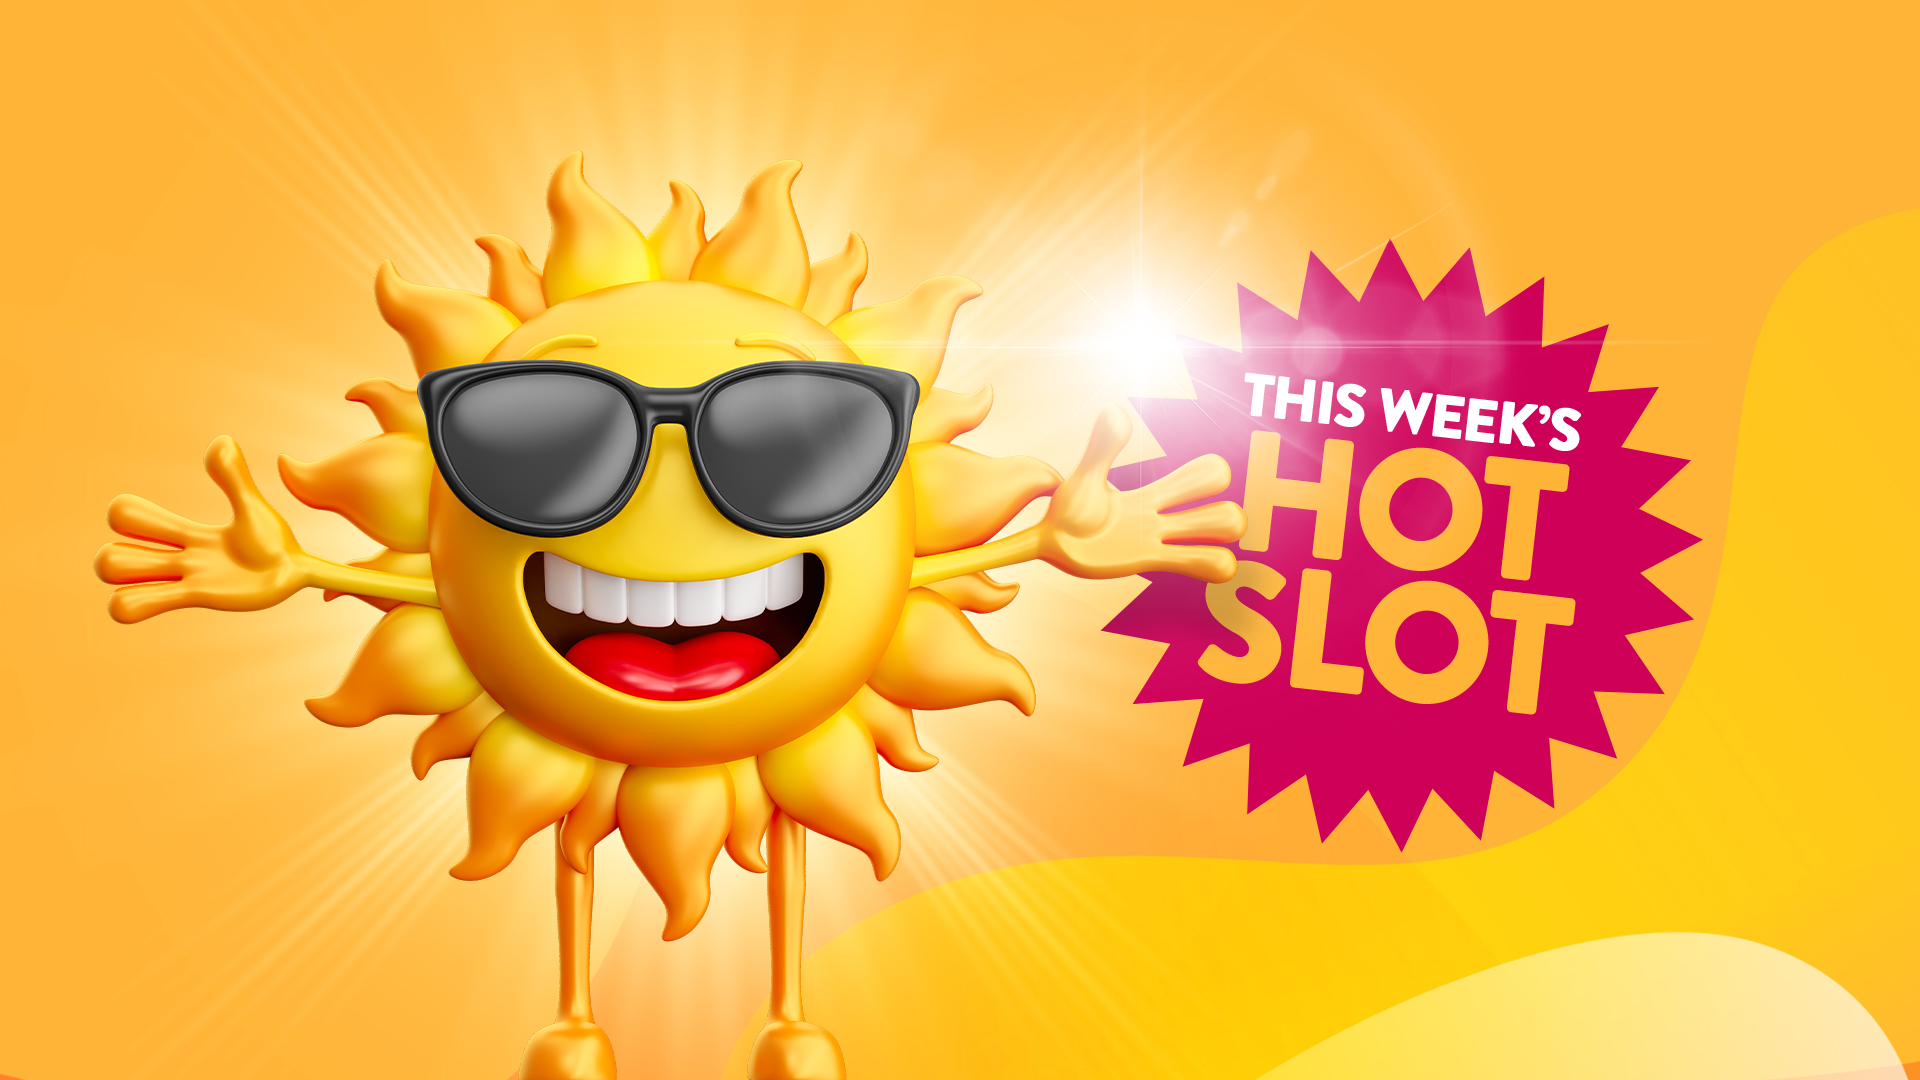 There’s a bright golden picture with a happy, smiling sun on top and pink text on a banner to the right that says ‘This Week’s Hot Slot’.